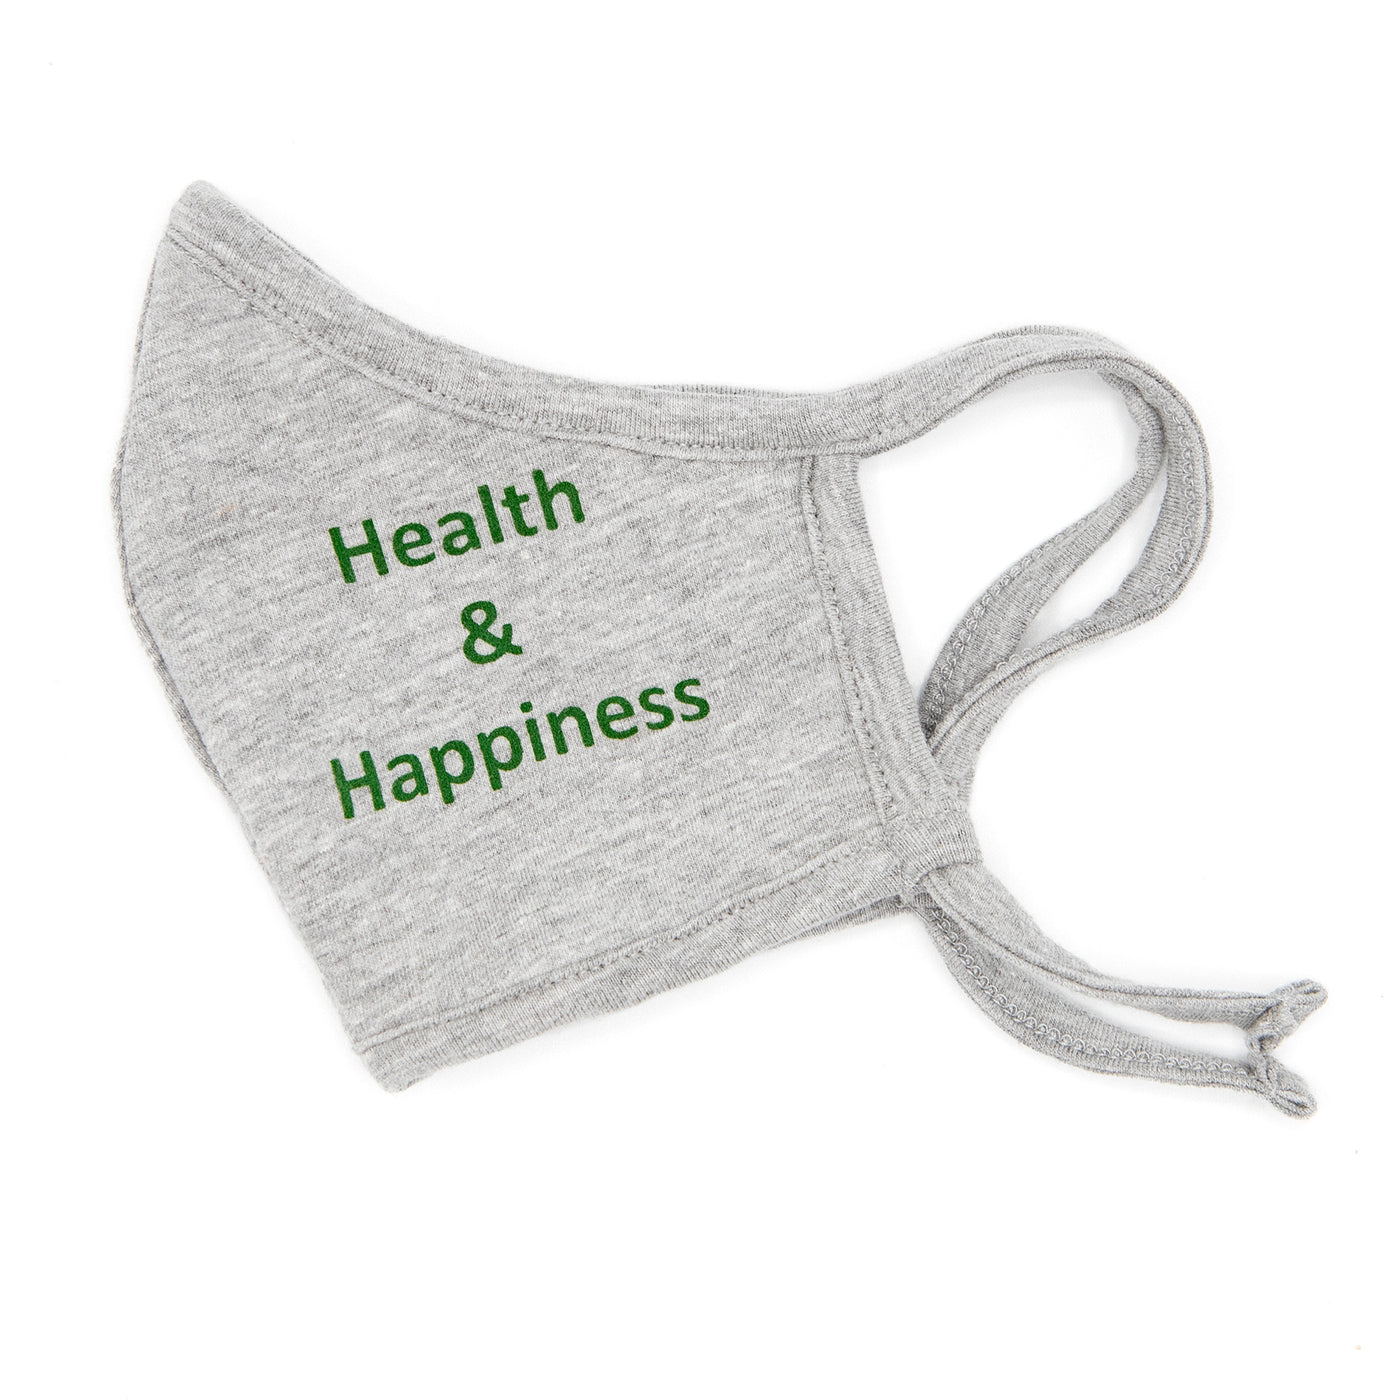 BAILEY BERRY Health & Happiness Kids Face Mask with Adjustable Infinity Strap, Filter Pocket